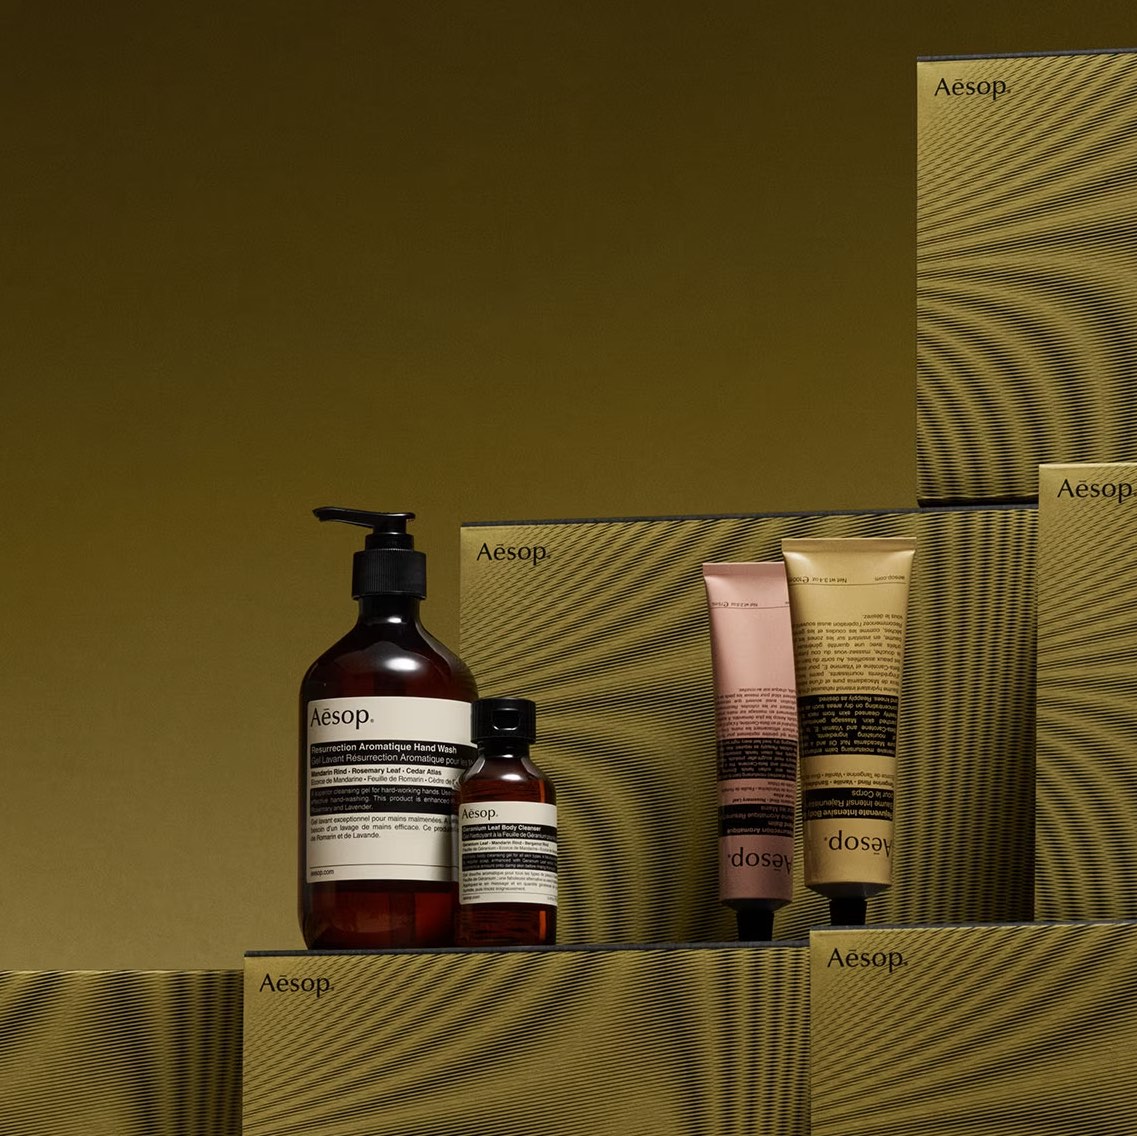 Aesop Majestic Melodies Gift Set